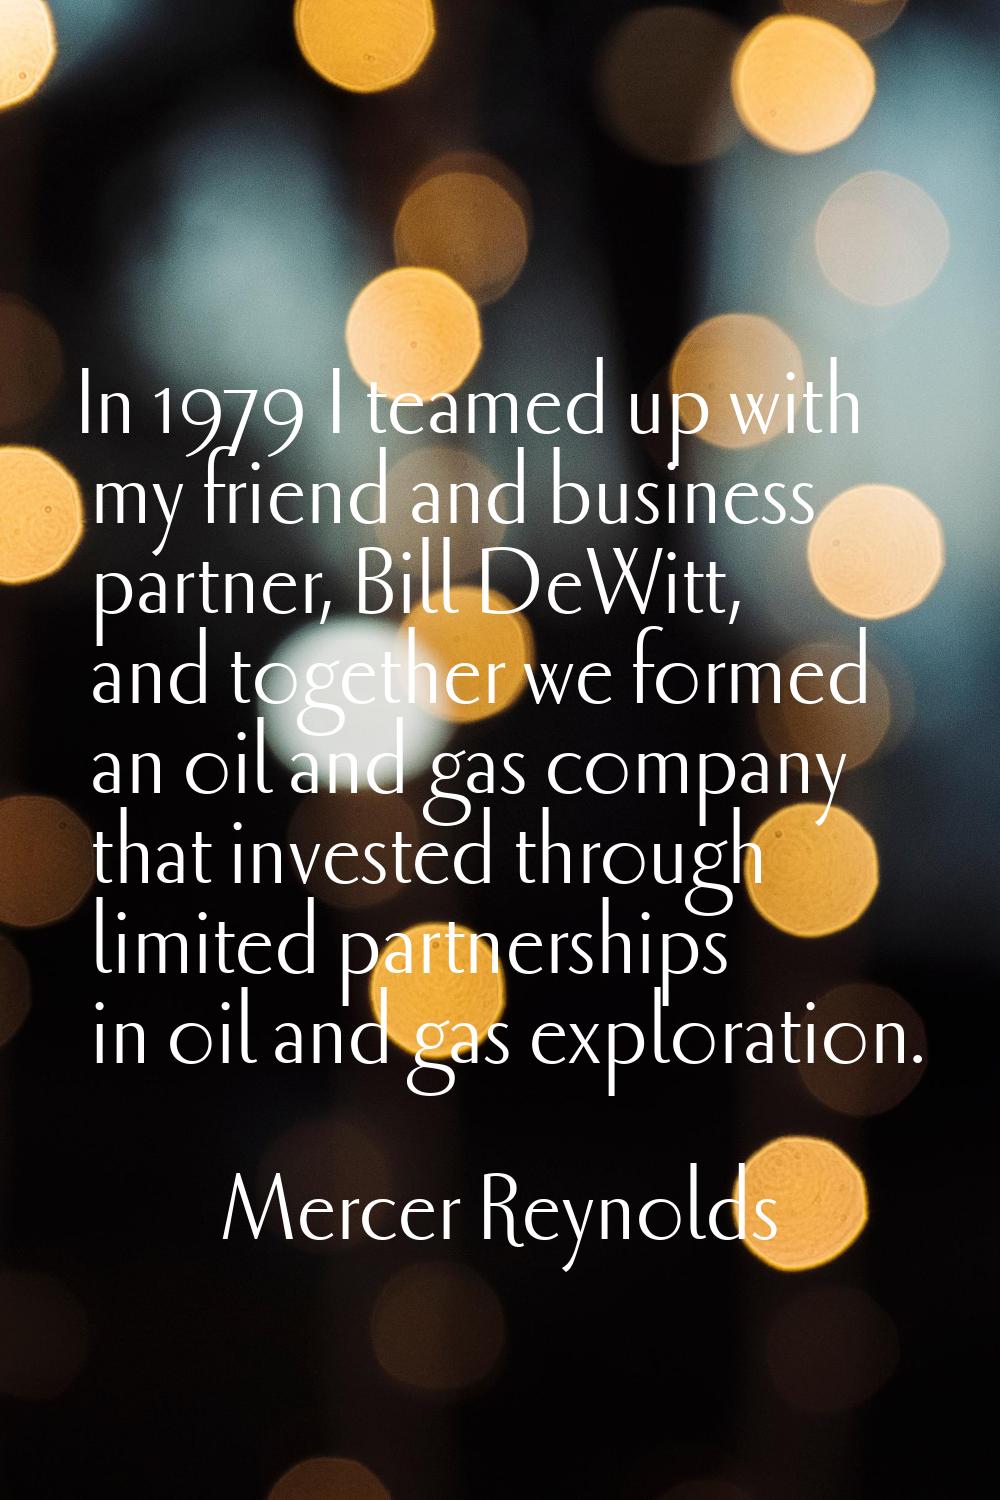 In 1979 I teamed up with my friend and business partner, Bill DeWitt, and together we formed an oil